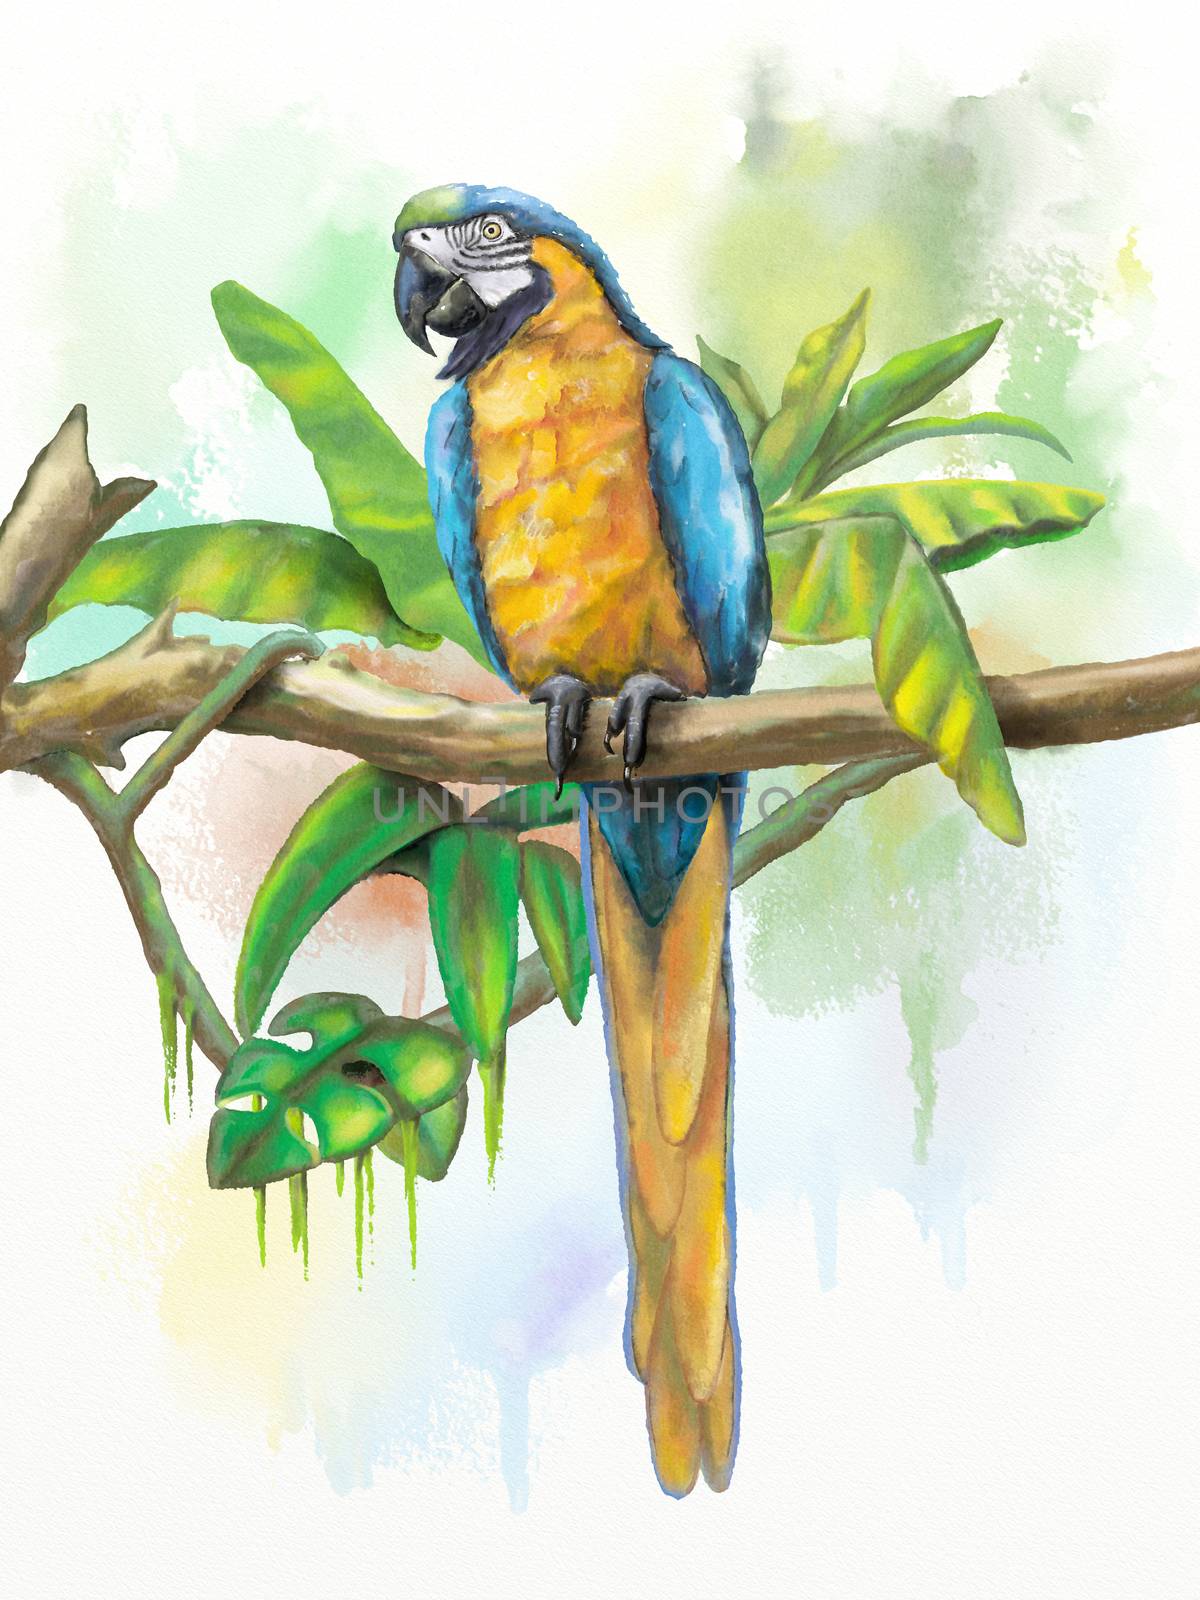 Blue and gold macaw with some tropical vegetation. Original digital watercolor.